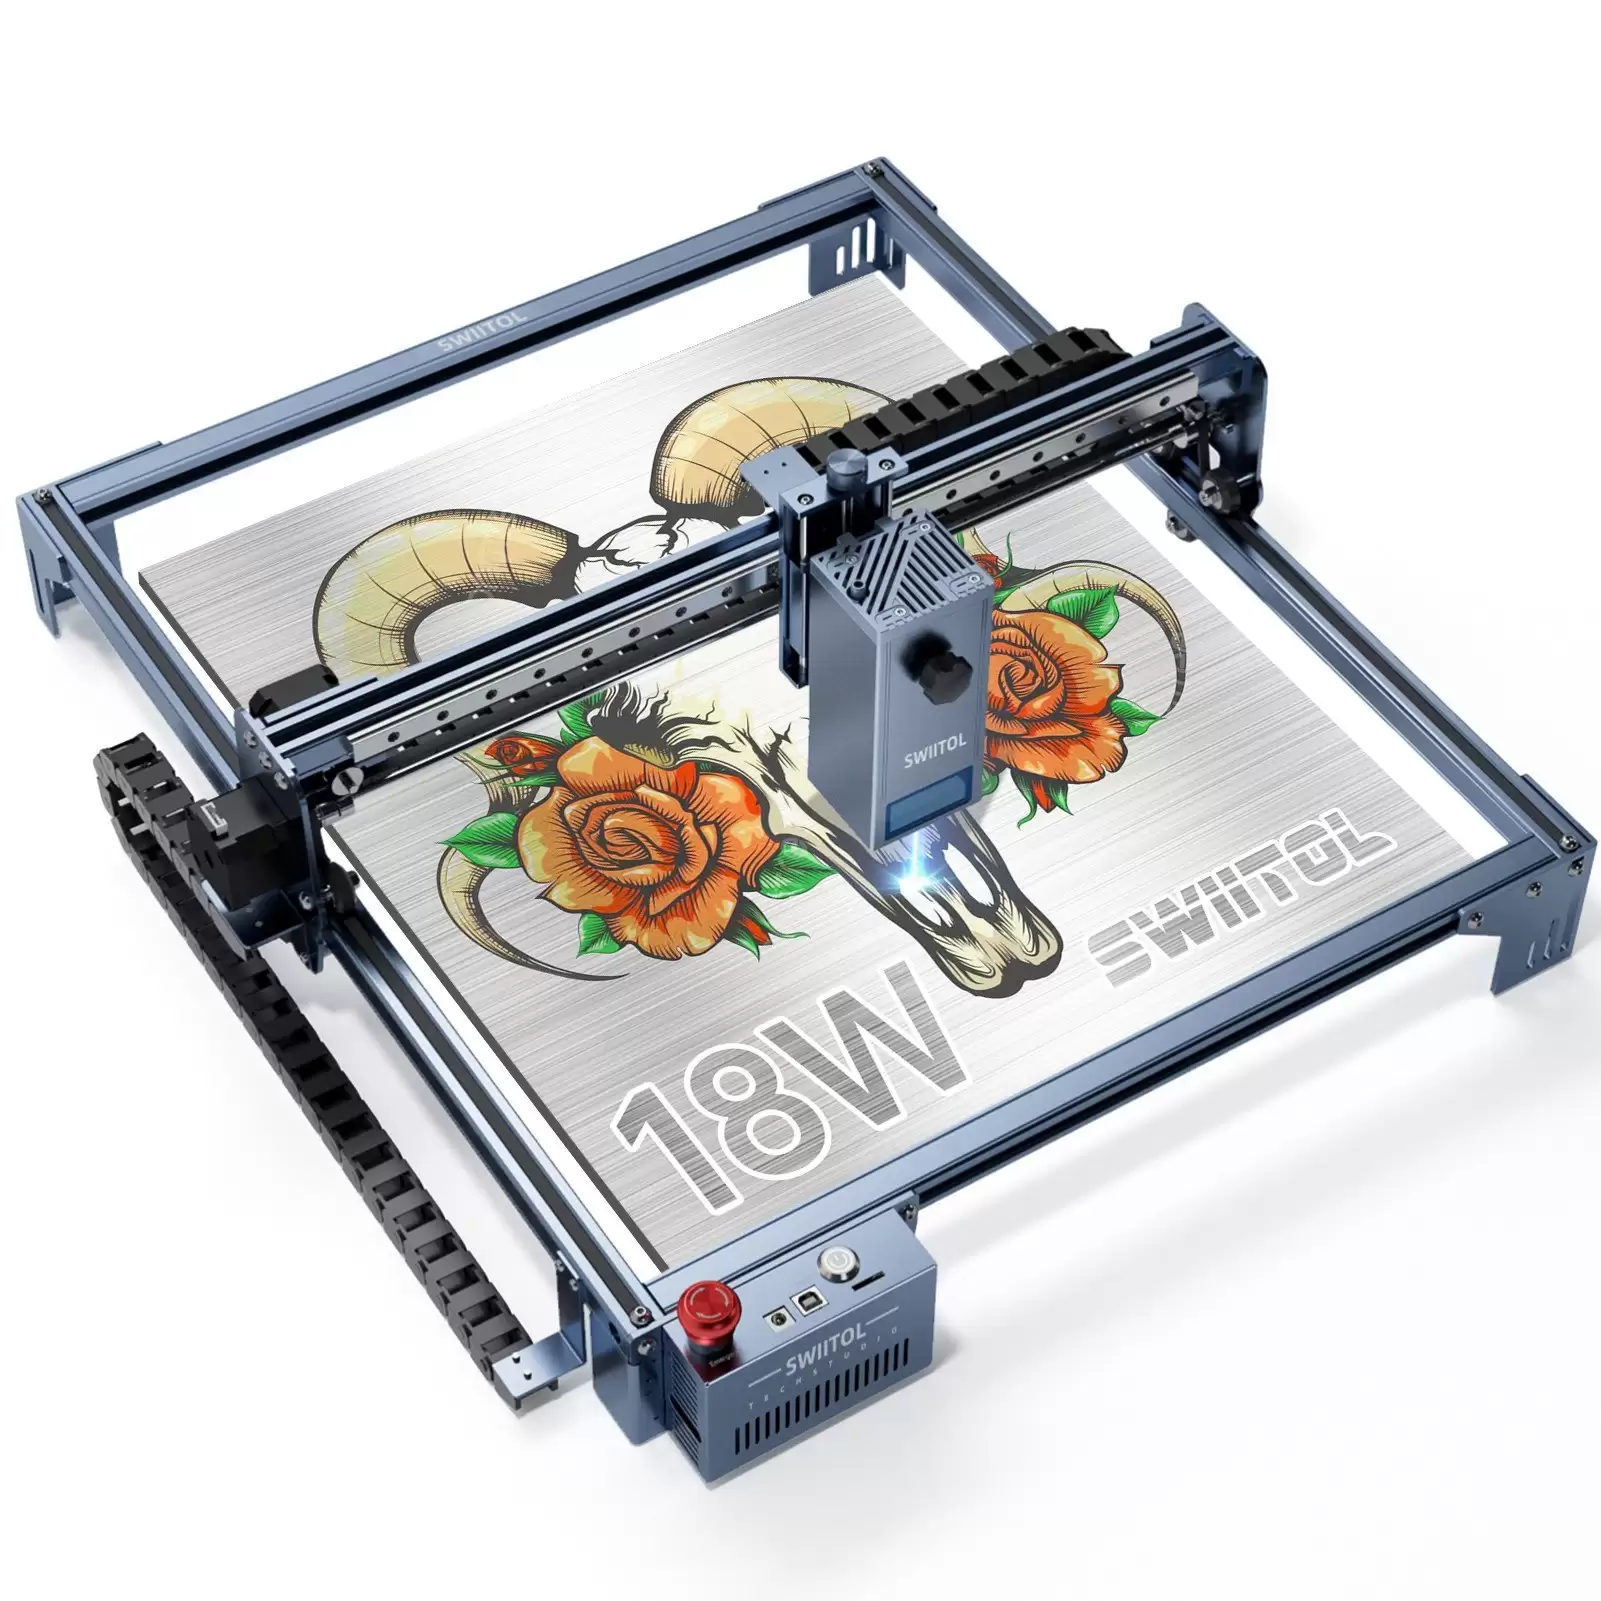 Order In Just €319 [eu Warehouse] Swiitol C18 Pro 18w Laser Engraver 30000mm/min High Speed 01mm High Precision With This Discount Coupon At Tomtop